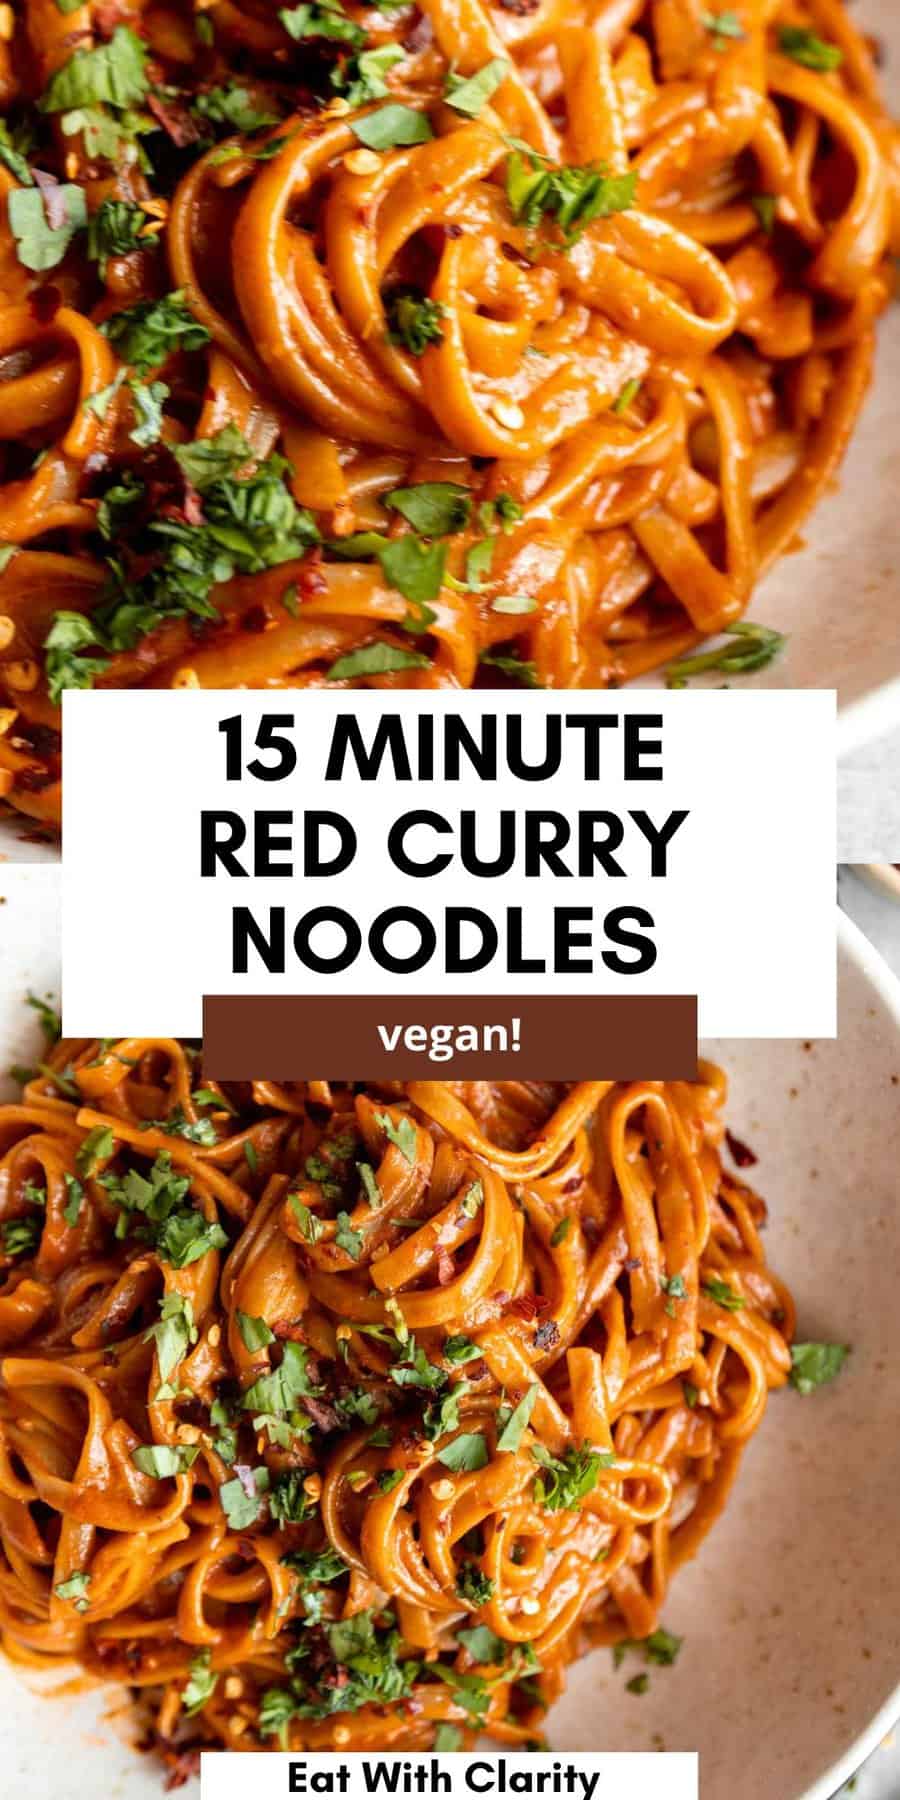 Thai Red Curry Noodles - Eat With Clarity